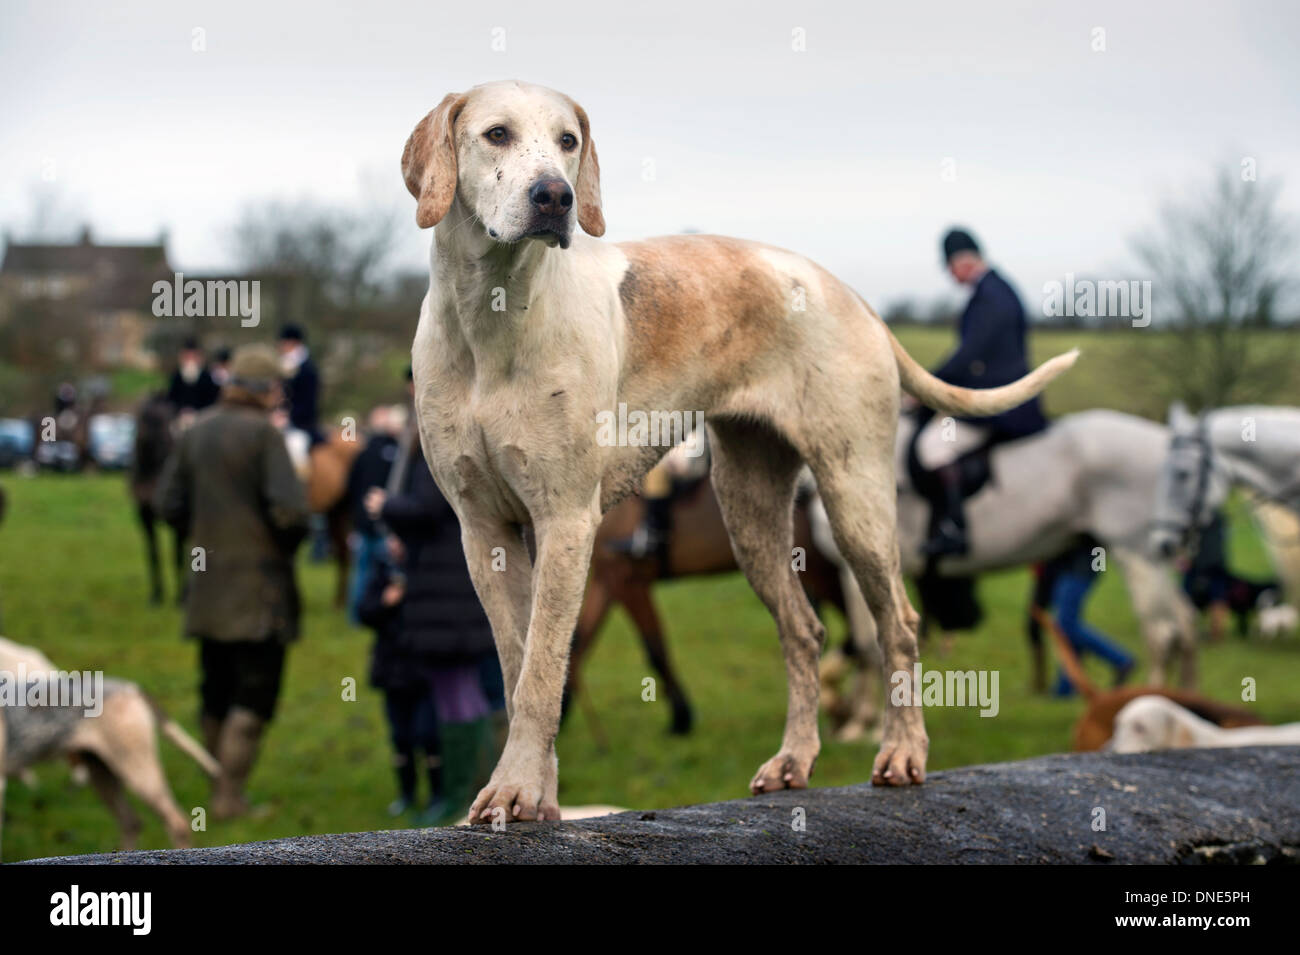 Hounds on a Cotswold stone wall at a meeting of the Beaufort Hunt in Didmarton, Gloucestershire UK Dec 2013 Stock Photo